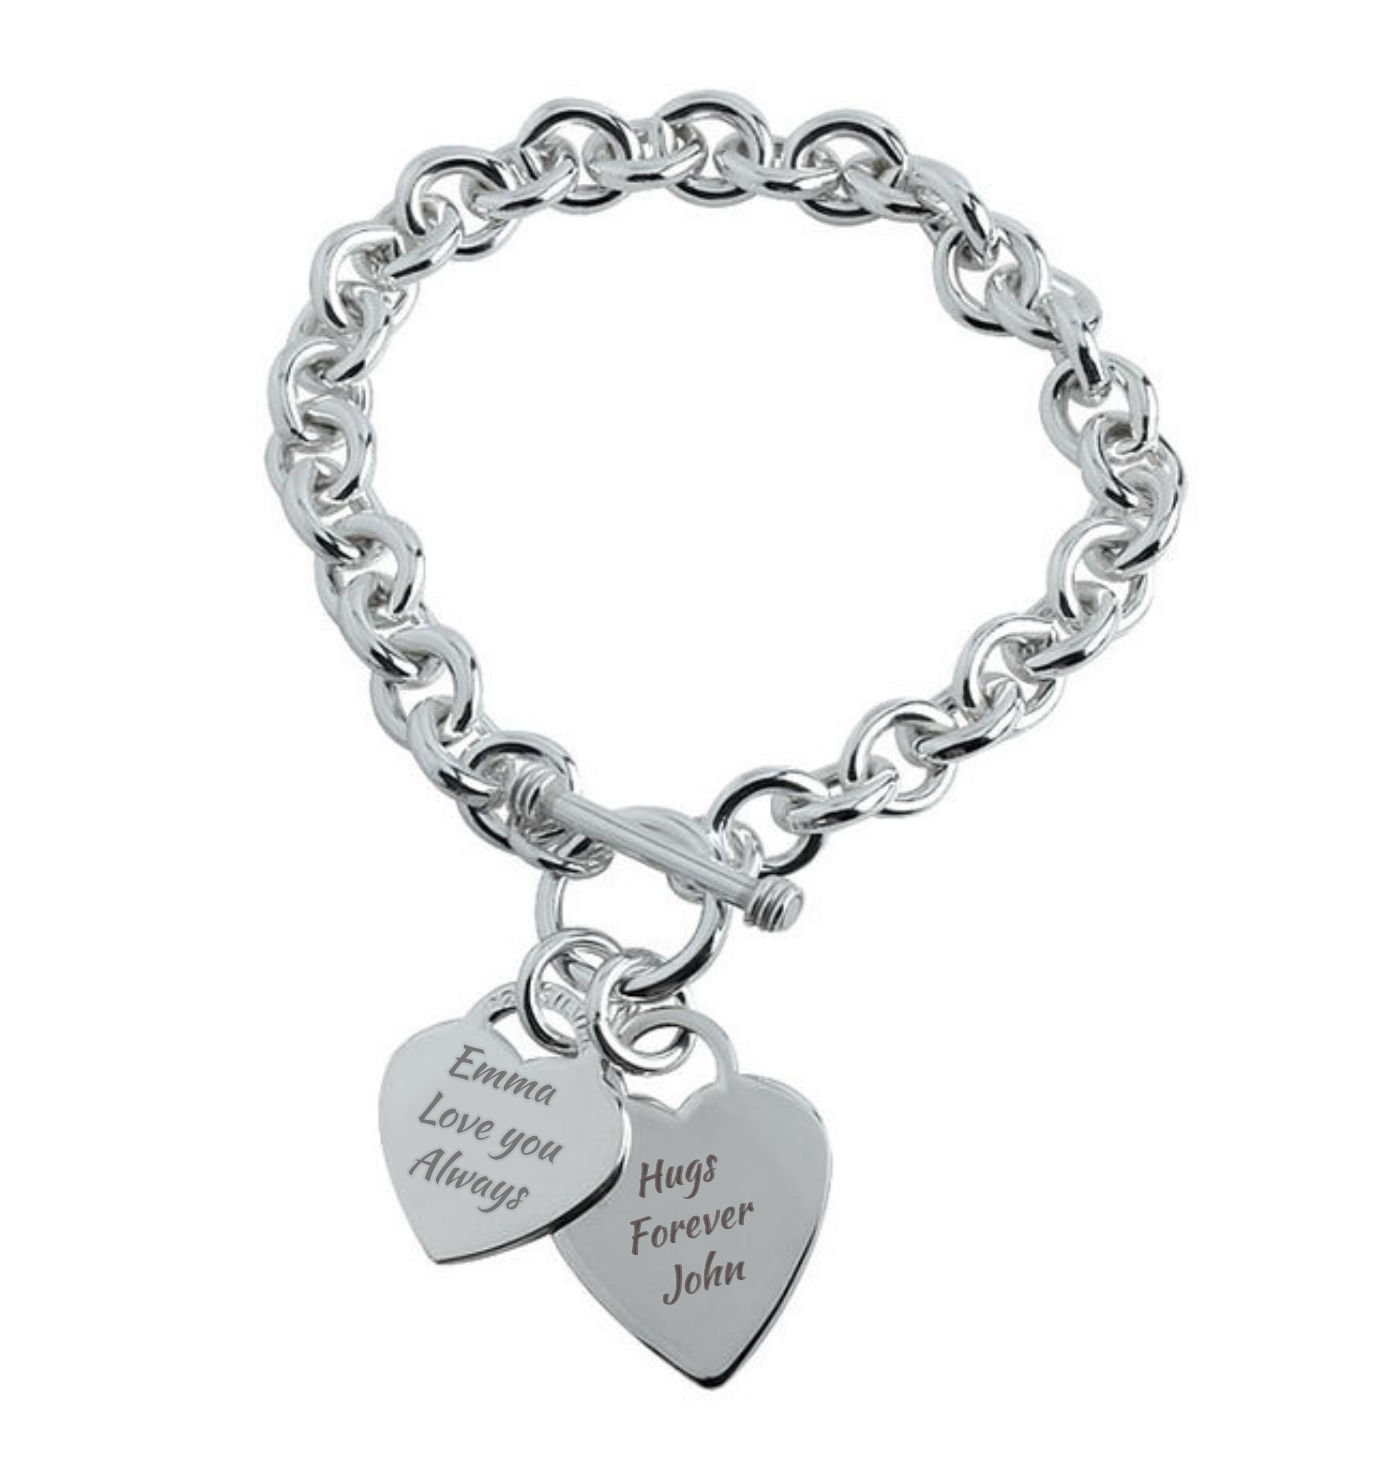 Personalised Silver Heart Jewellery for Valentines Day